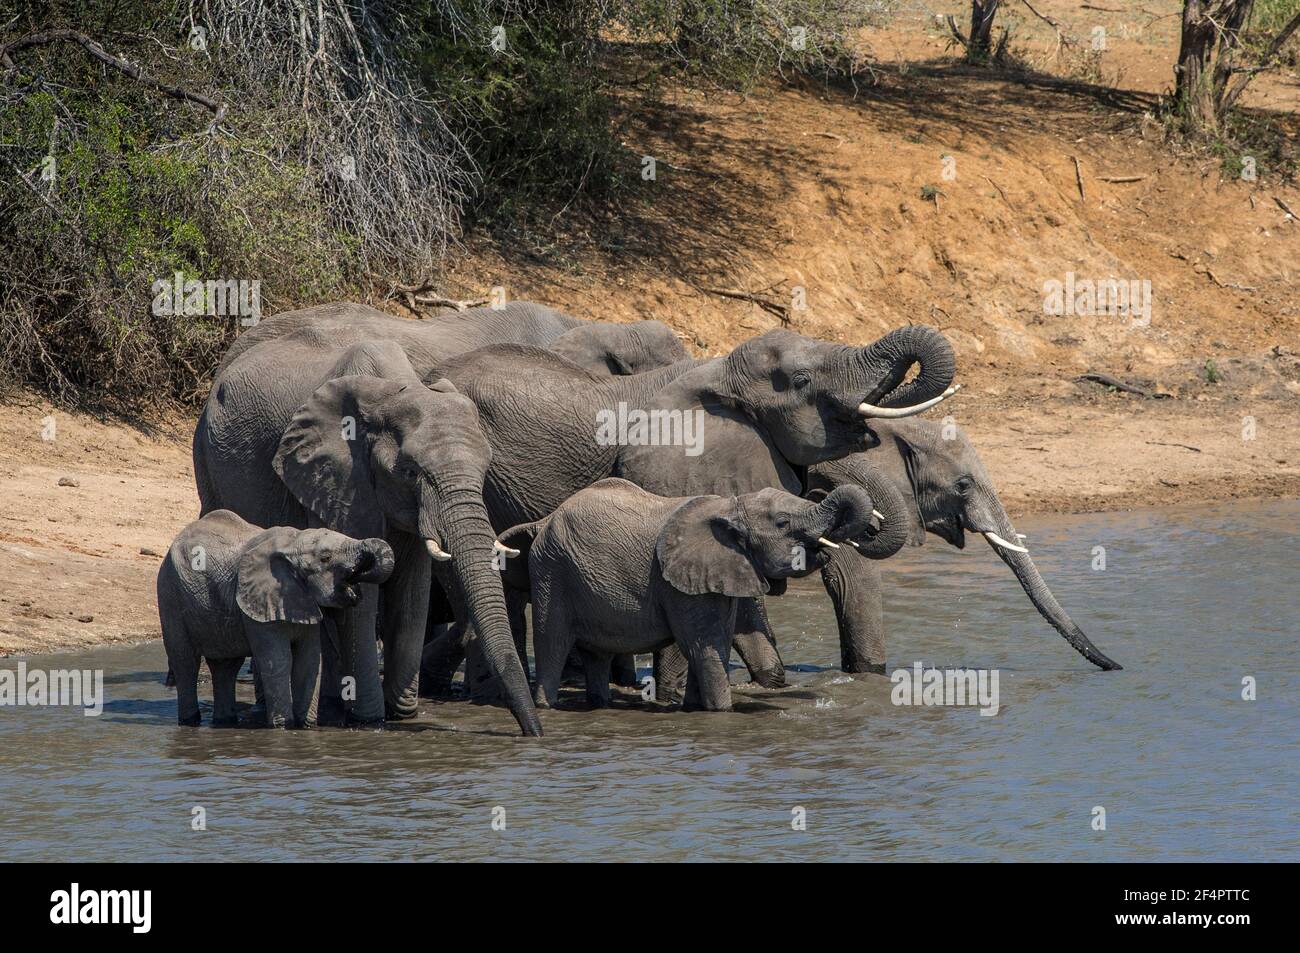 African Elephant (Loxodonta africana) in Kruger National Park, South Africa gathering for a drink and to meet old friends. Stock Photo